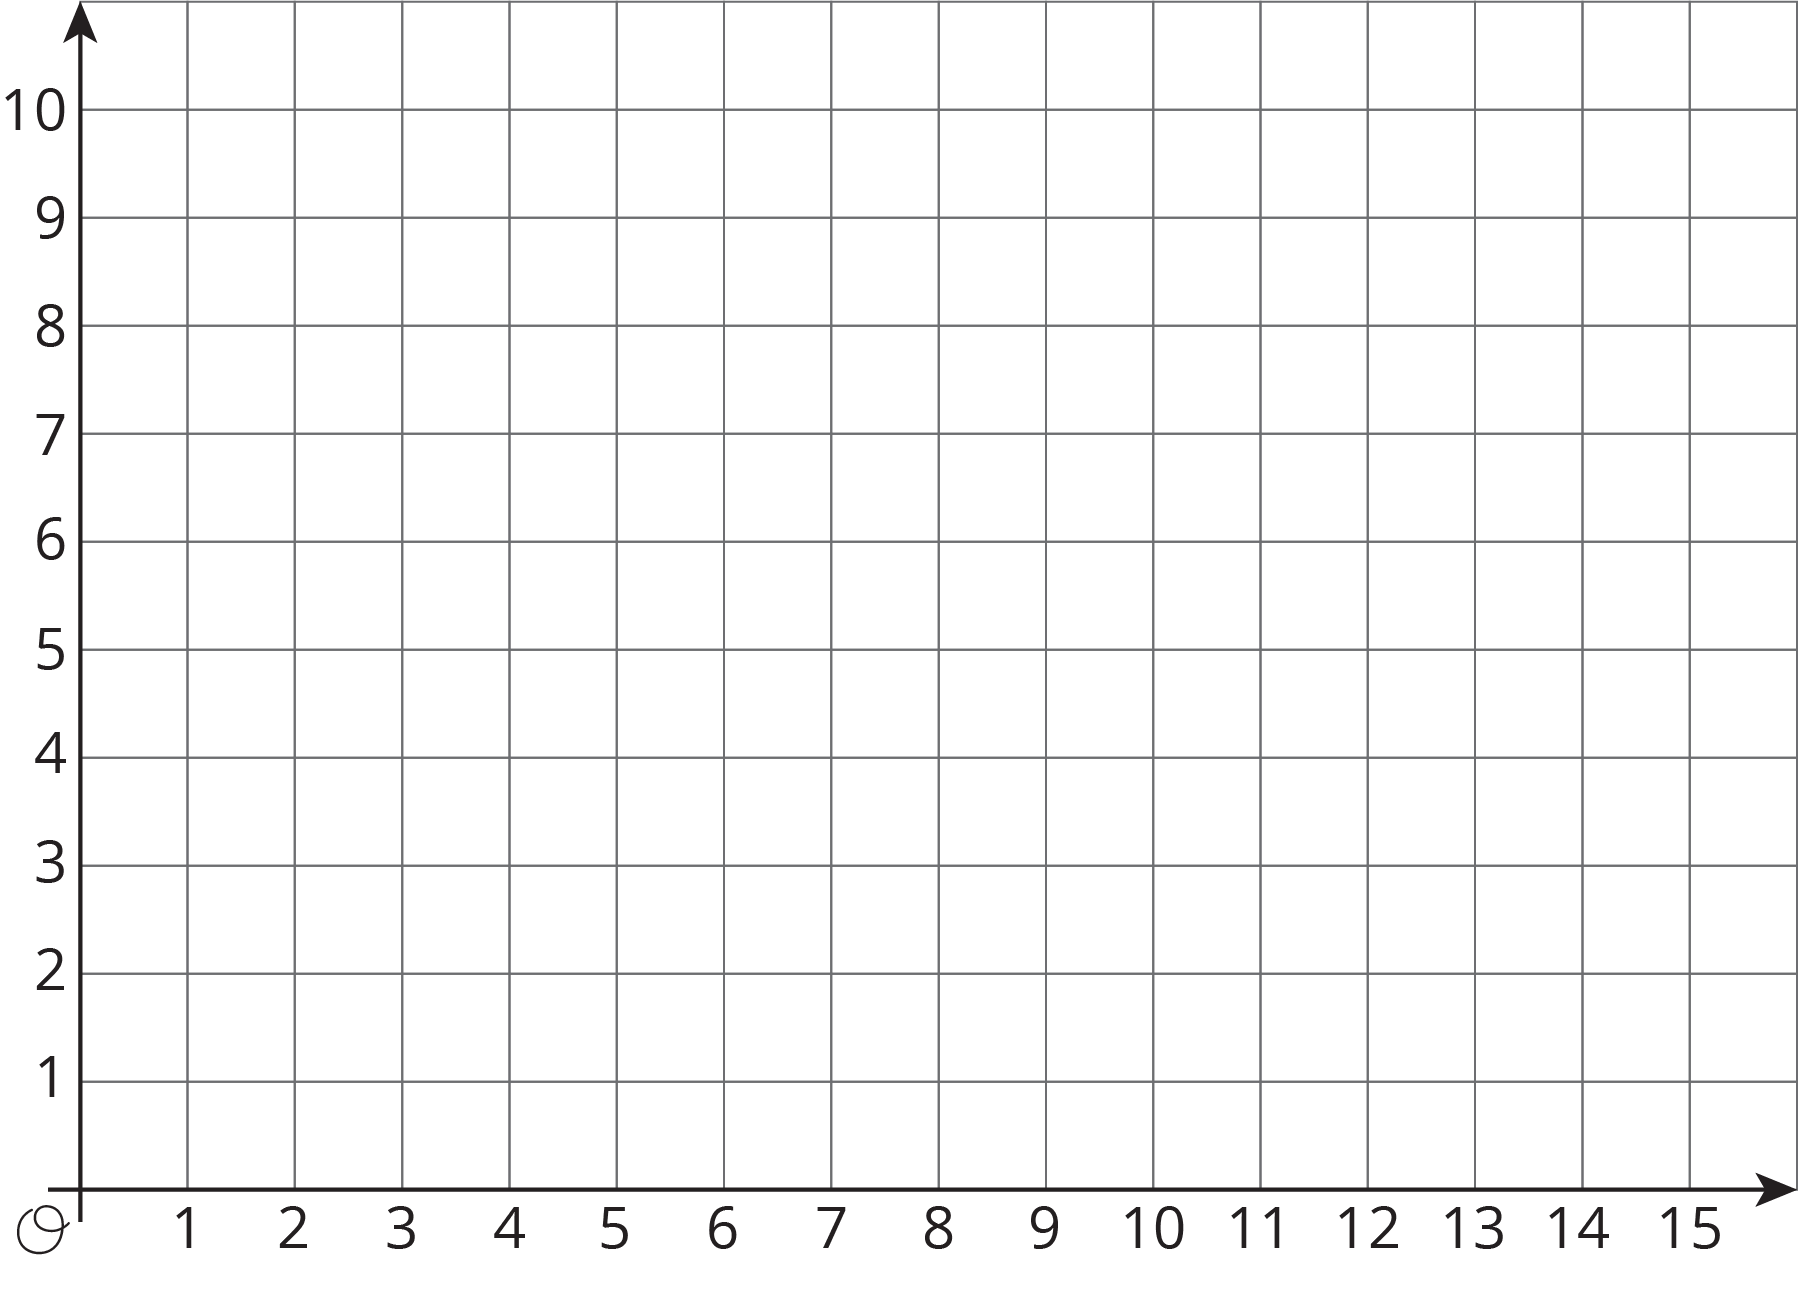 A coordinate plane with the origin labeled “O”. The numbers 0 through 15 are indicated on the horizontal axis and the numbers 0 through 10 are indicated on the vertical axis.